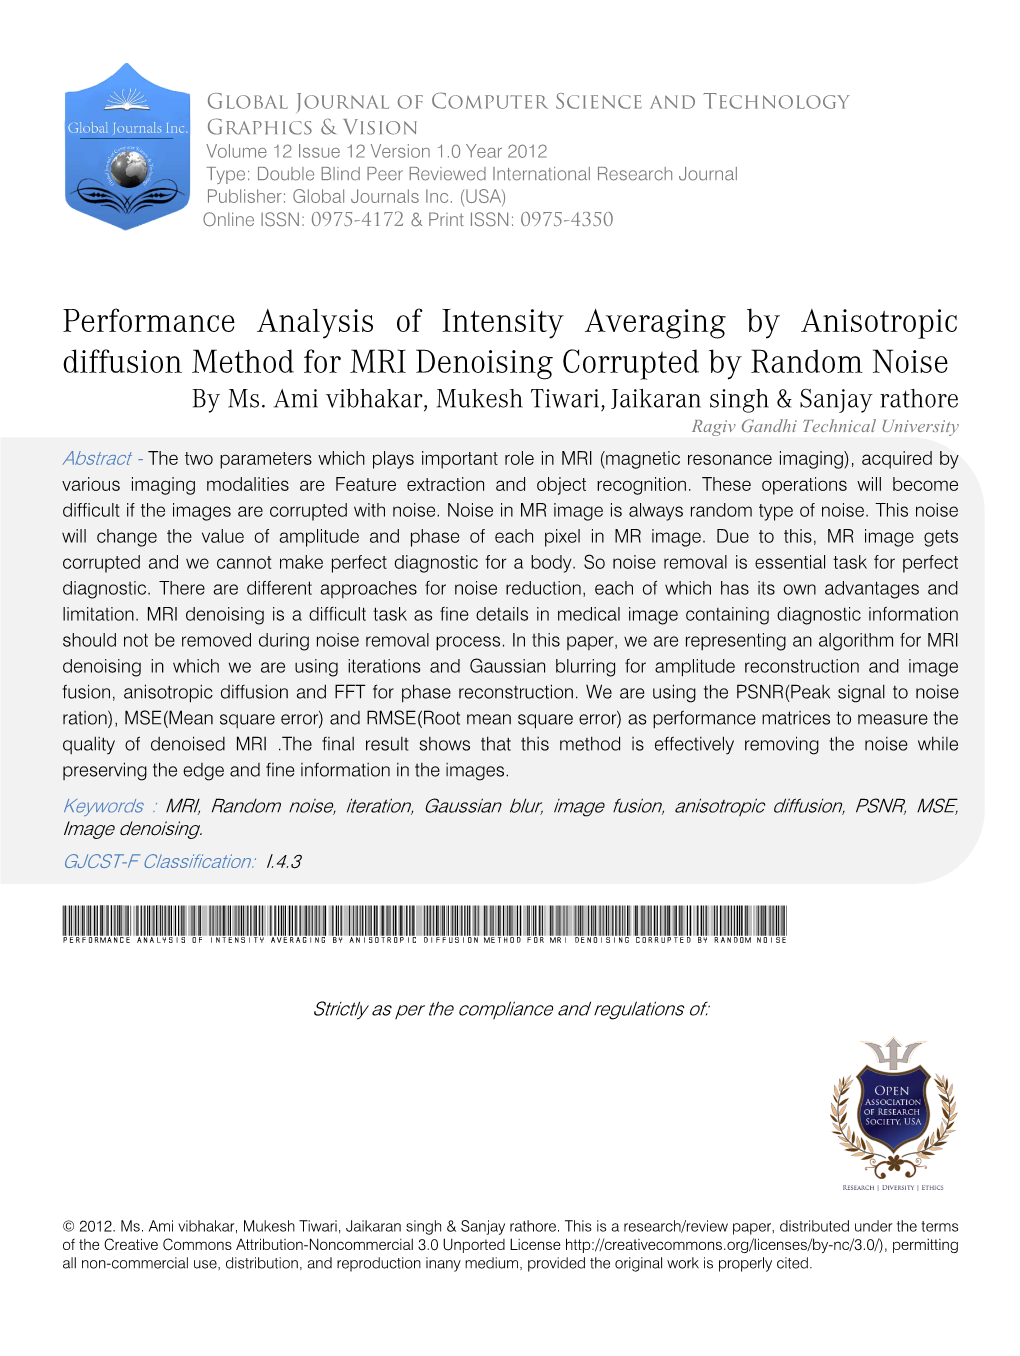 Performance Analysis of Intensity Averaging by Anisotropic Diffusion Method for MRI Denoising Corrupted by Random Noise by Ms